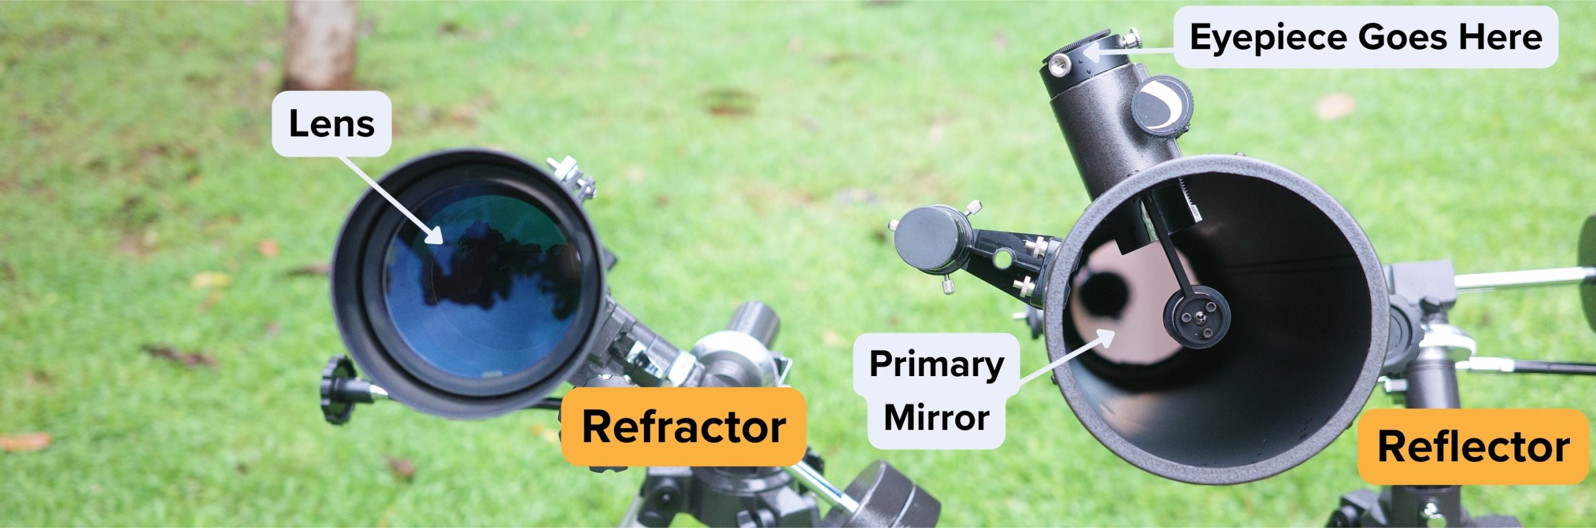 Reflector's mirrors and refractor's lens